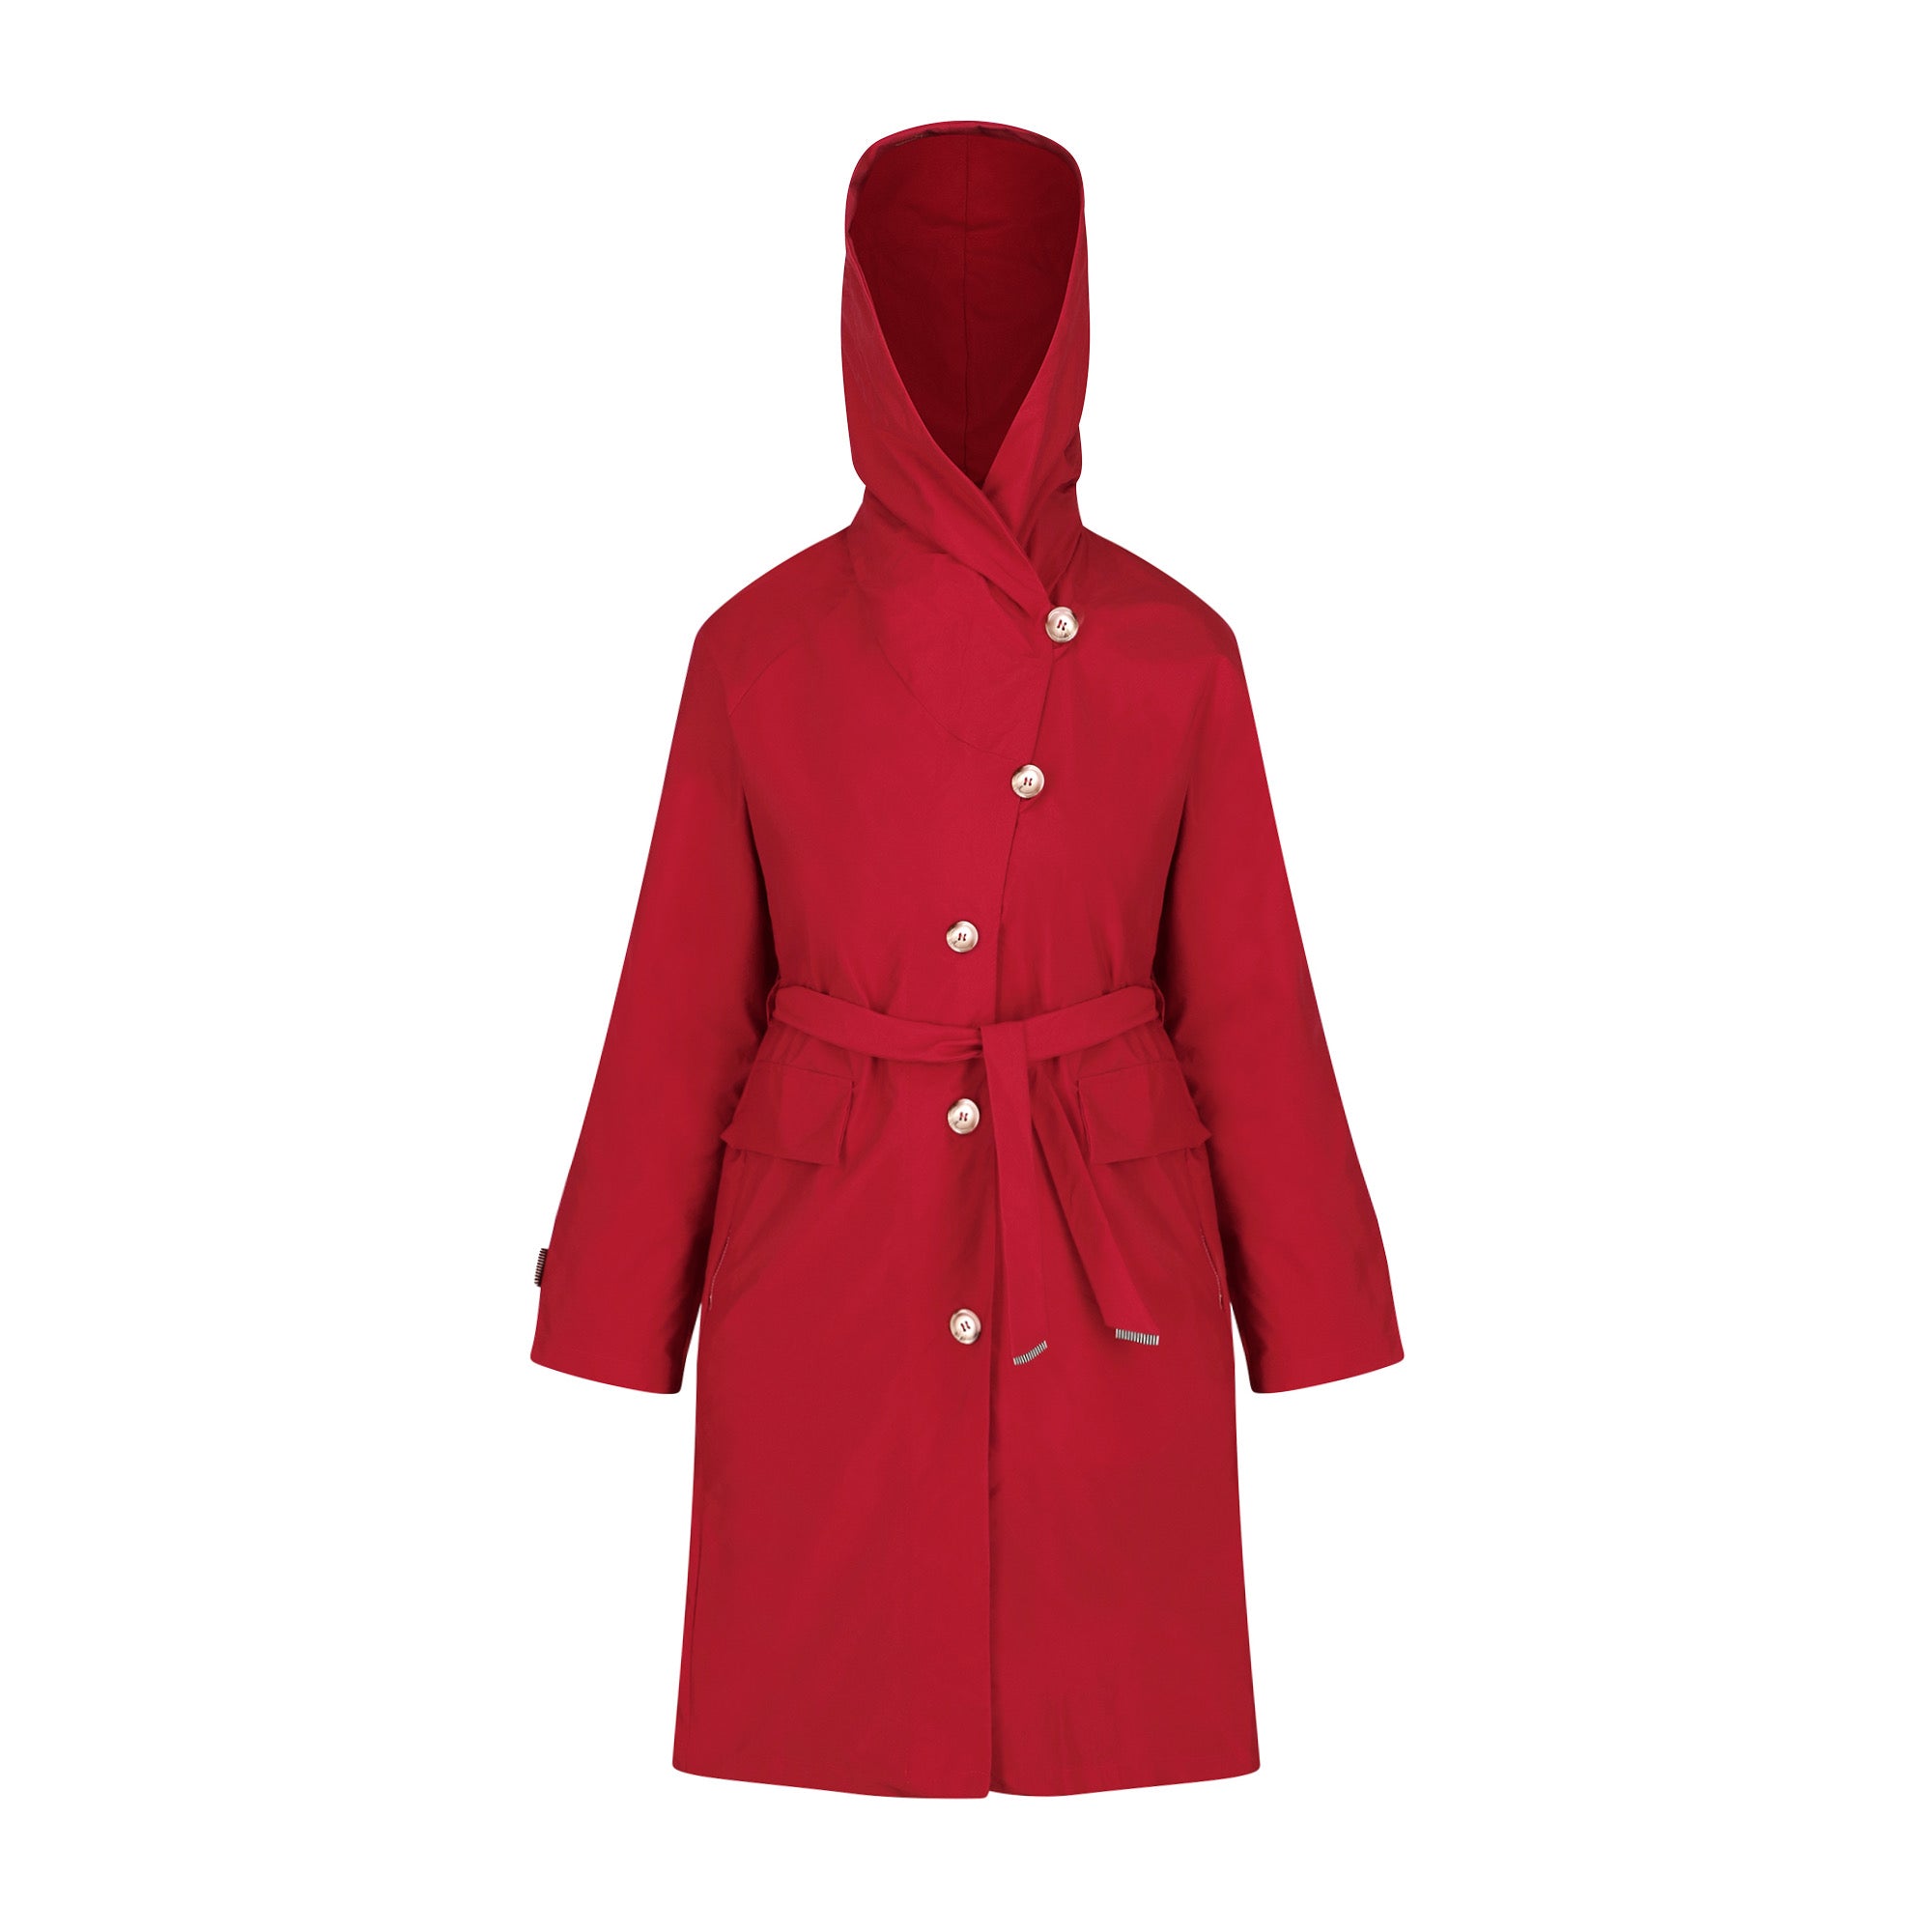 Mistral raincoat - Red Sunset color - front view